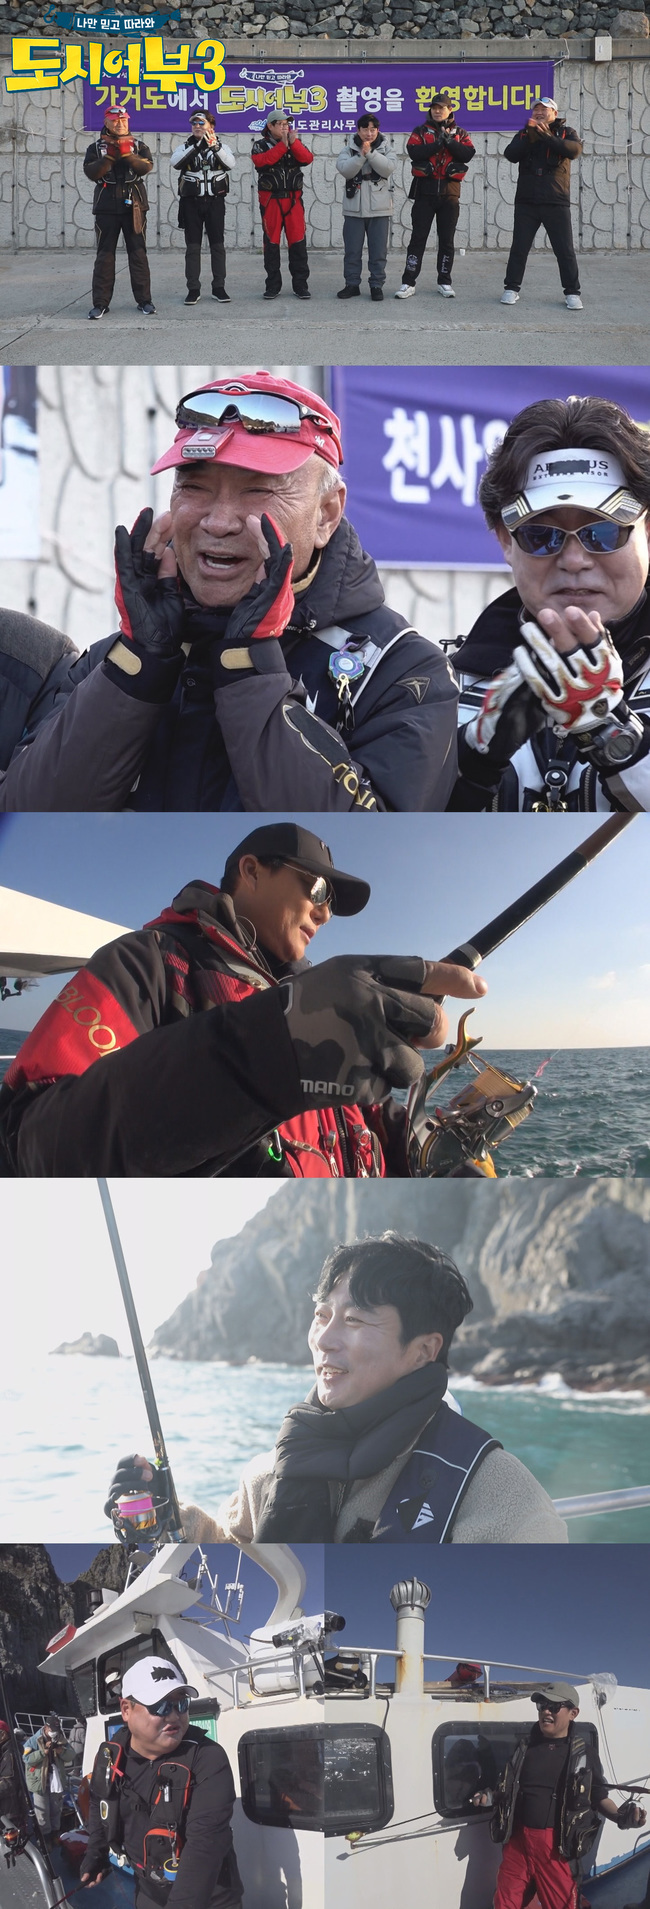 The Fishermen and the City have an unusual team confrontation.Channel A Entertainment, which will air on December 16, will show the 31st episode of The Fishermen and the City Season 3 (hereinafter referred to as The The Fishermen and the City) where they are playing a fishing match with Acanthopagrus schlegelii with Park Jin-cheol in Gageodo, South Jeolla Province, following the fishing of the sea bream X long-tailed bengedom in Jeju Island. It is.Gageodo, Park Jin-cheol, the southernmost part of the country called the dream holy place for fishermen, caught the 52cm Acanthopagrus schlegeli, the largest fish record of The Fishermen and the City, two years ago.Lee Deok-hwa expressed his infinite affection for Gageodo, saying, Everyone who is a fisherman wants to go once, while Lee Deok-hwa, the man of Gageodo, was on a follower.I think meat will explode today and tomorrow, he said, raising expectations for a big hit.The fishing on this day, which was an unusual team match, is a match between Lee Kyung-kyu X Lee Soo-geun X Kim Joon-hyuns Comedy team and Lee Deok-hwa X Park Jin-cheol X Lee Tae-gons Rain (Hey) Drama team.Lee Kyung-kyu said, Its worth a try, trust me, Who won the Park Pro and Acanthopagrus schlegeli?I have never won once or twice, he said, expressing strong confidence in victory.Kim Joon-hyun also adds to the curiosity of the broadcast that said, I am the only one who caught Acanthopagrus schlegeli when no one catches.So, Lee Kyung-kyu, who said, Amateur sometimes wins pros, said that the non-player team Lee Deok-hwa, can win enough, which is very rare.It is noteworthy whether the comedy team can overturn everyones expectations and write the Acanthopagrus schlegeli reverse drama.